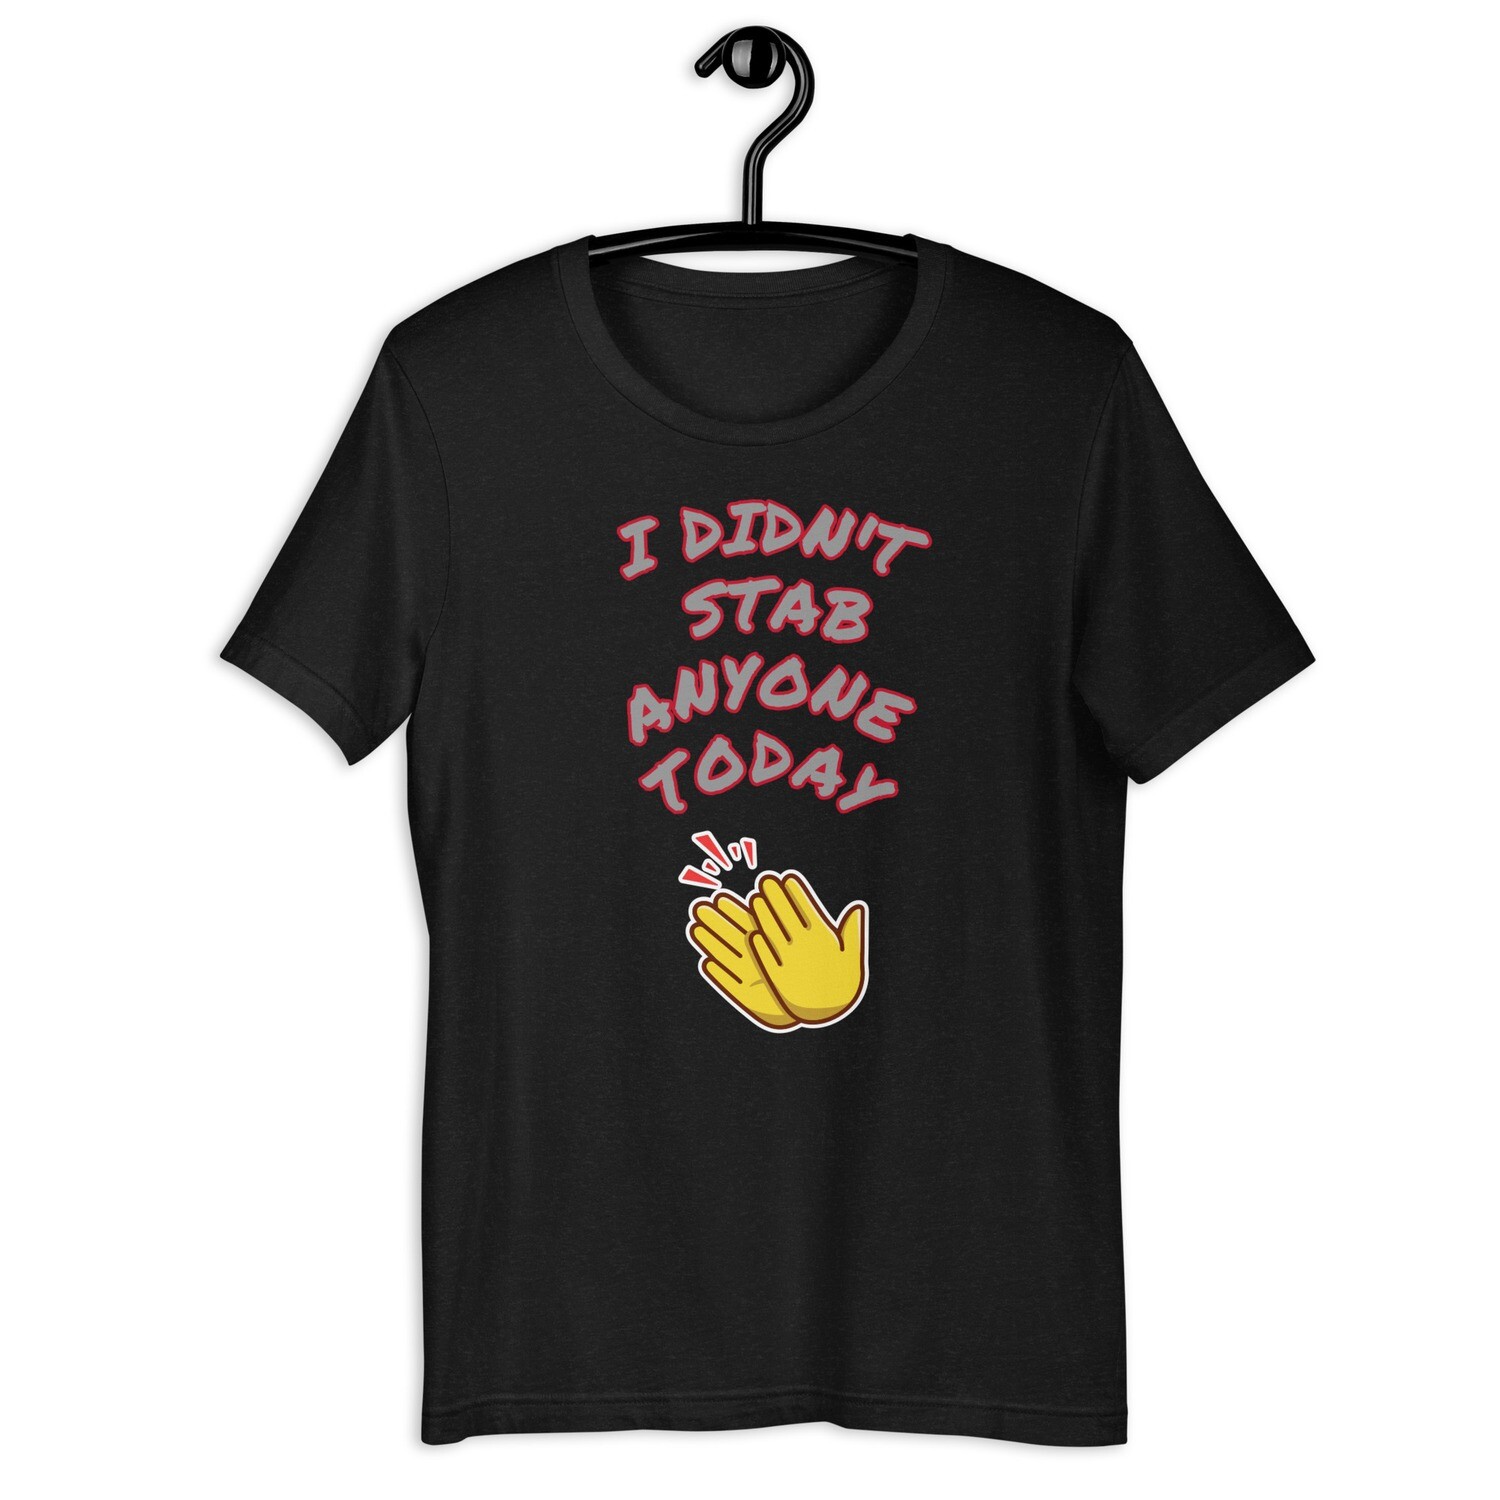 "I didn't Stab anyone today" Unisex t-shirt